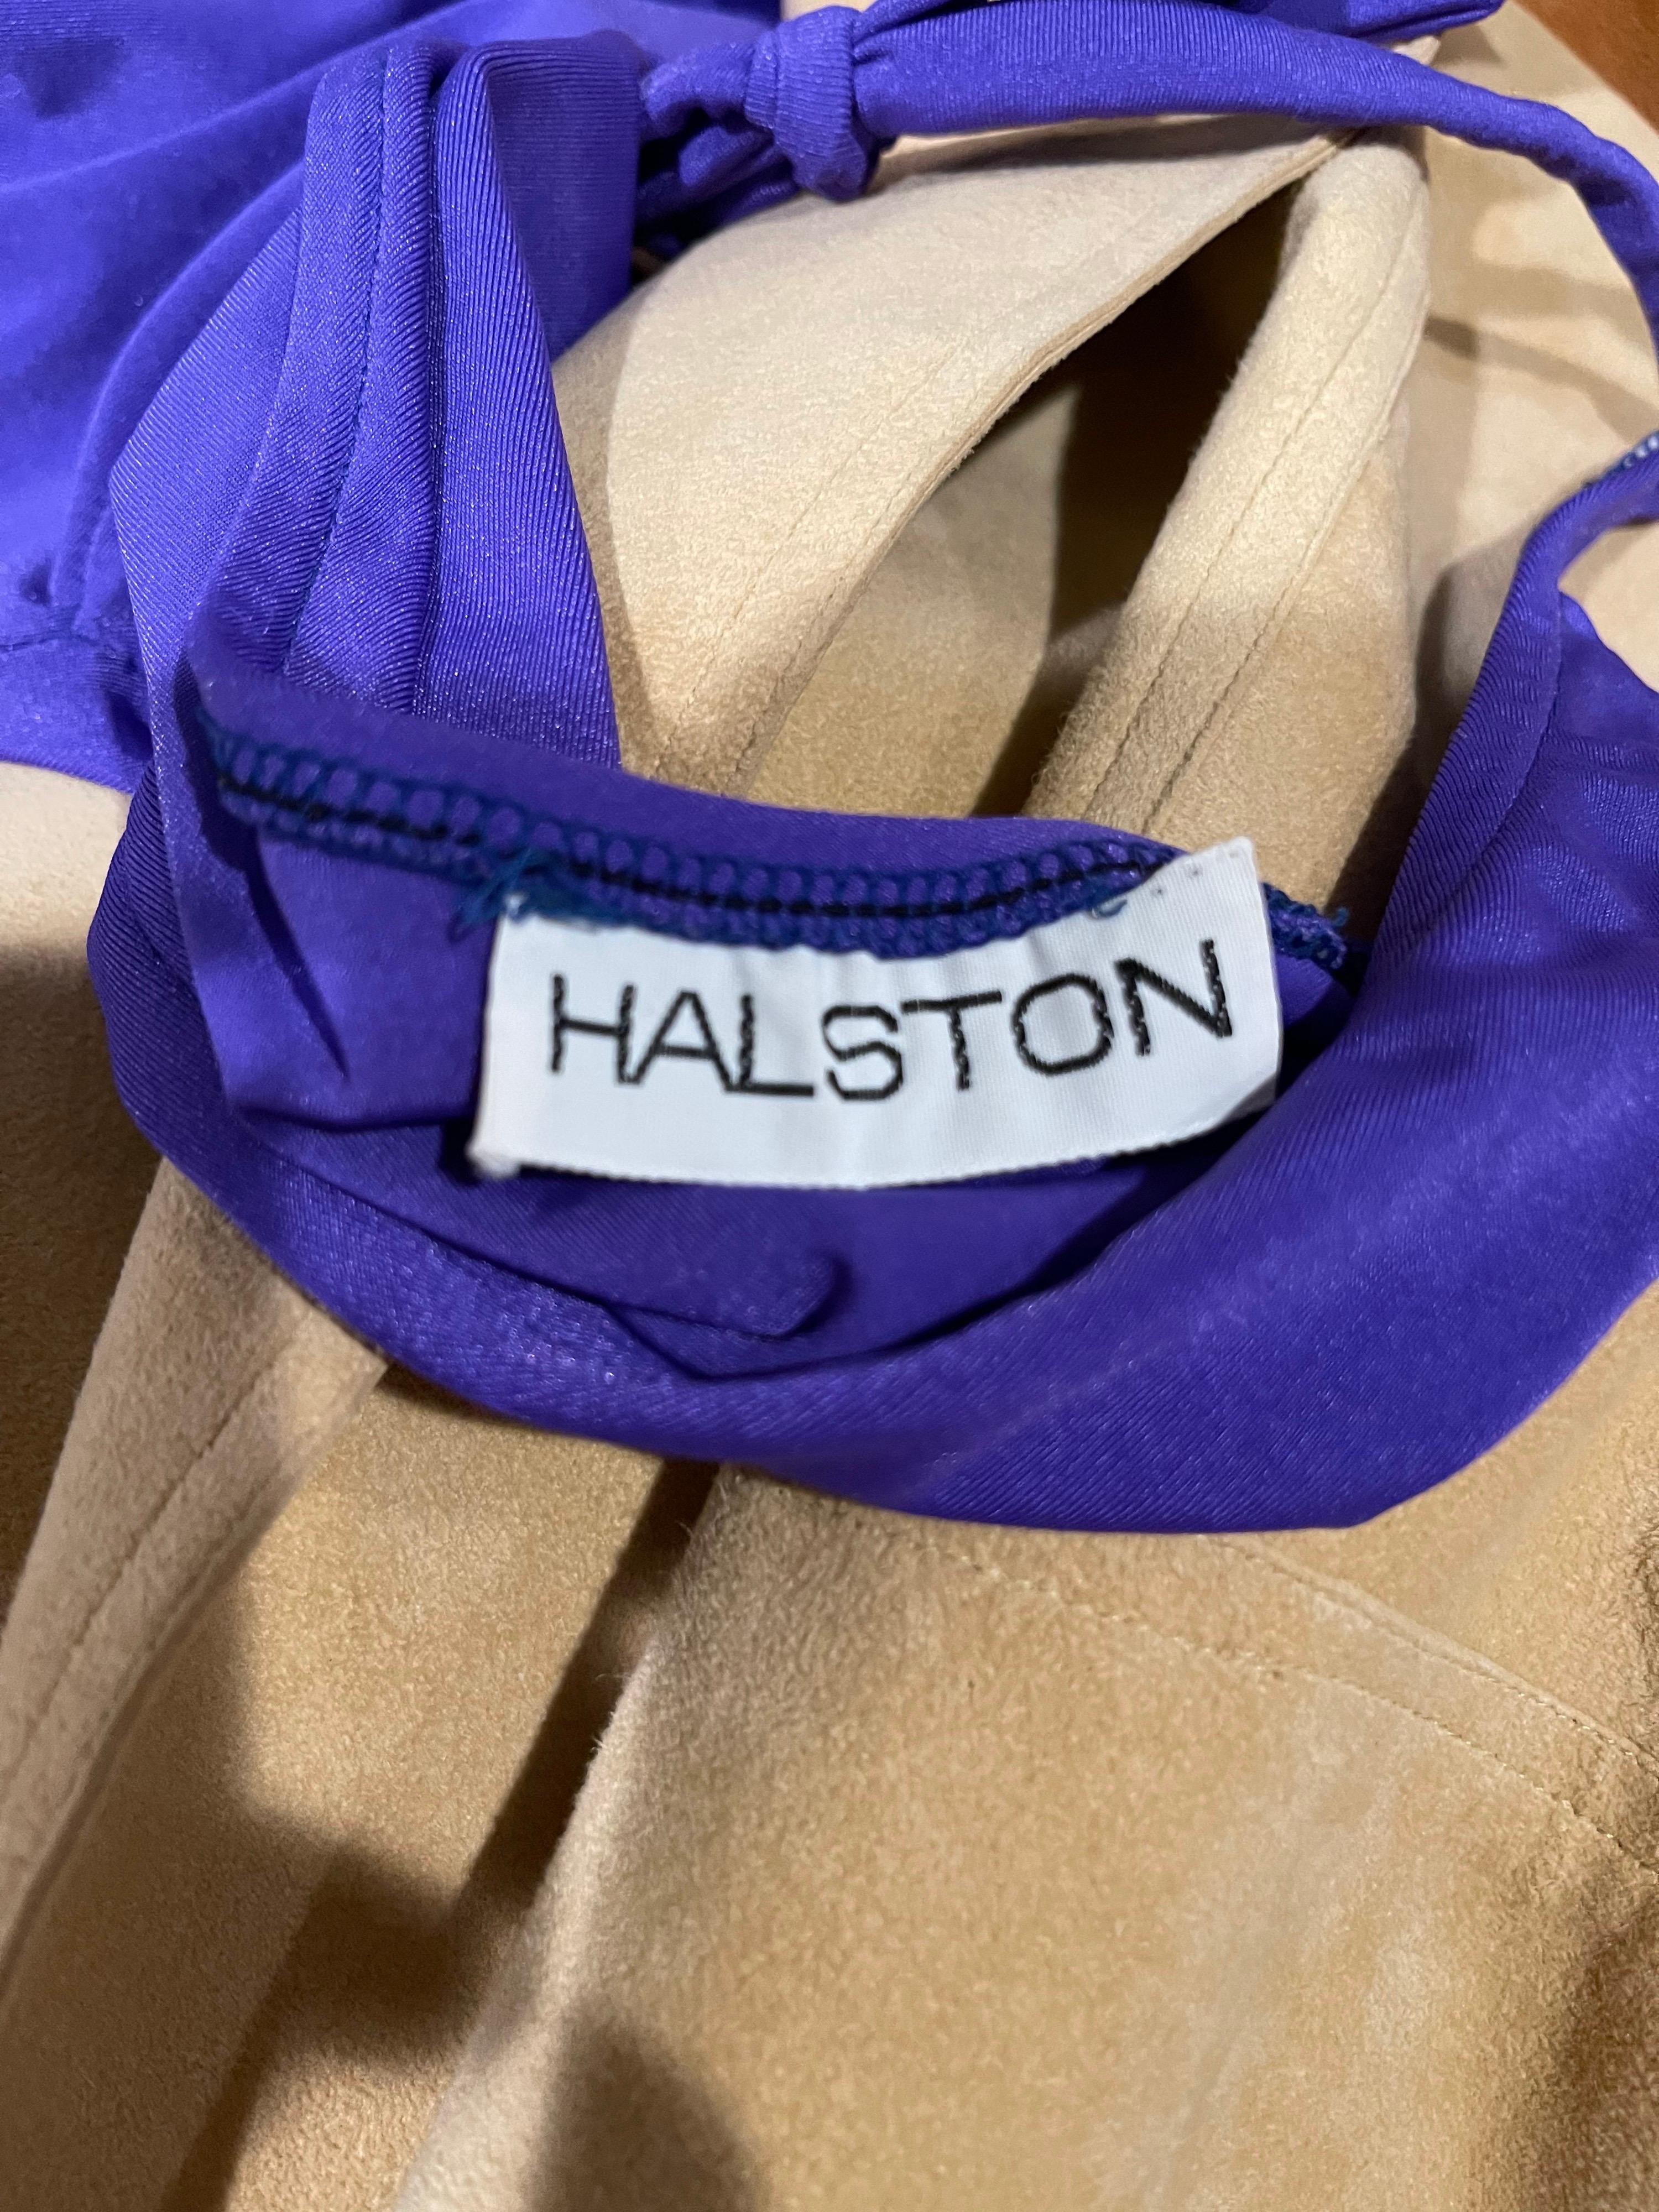 Rare and sexy 1970s HALSTON purple one piece plunging halter swimsuit OR bodysuit ! Beautiful purple jewel tone color. This rare beauty is one of 6 Halston swimsuits that I recently acquired from an original Halstonette model. 
Great for the beach,